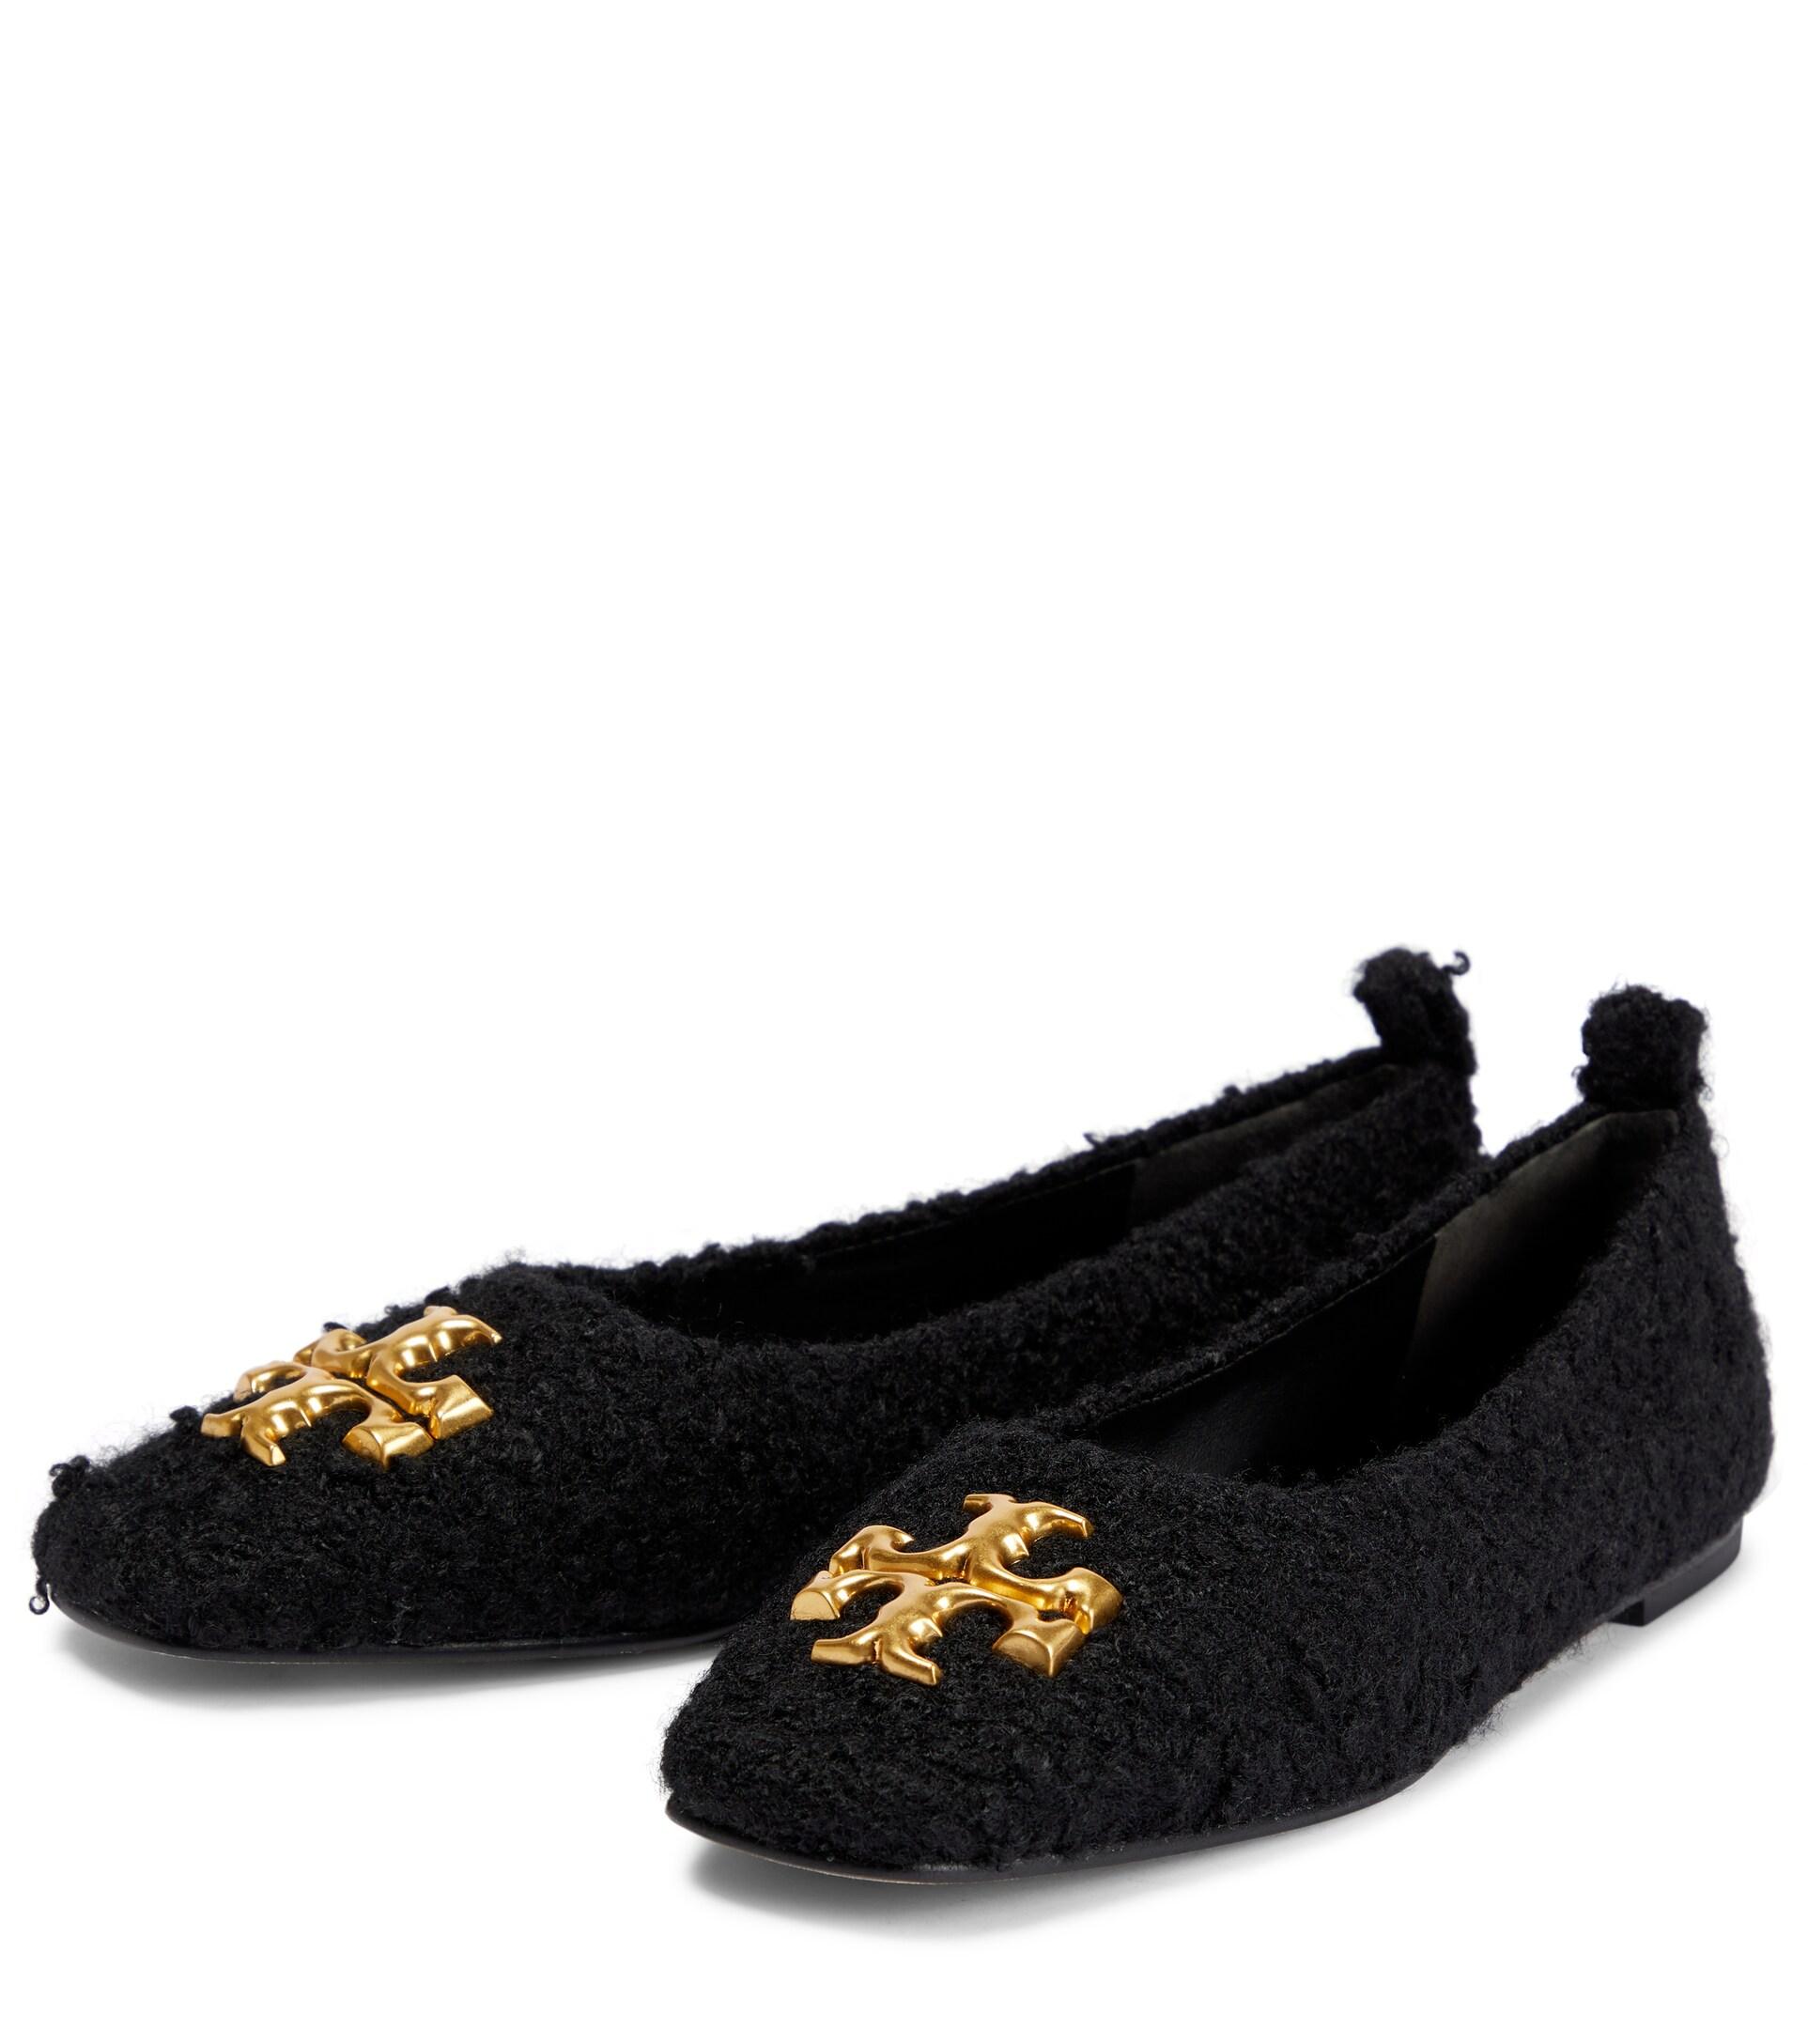 Tory Burch Leather Black Eleanor Logo Ballerina Pumps Womens Shoes Flats and flat shoes Ballet flats and ballerina shoes 